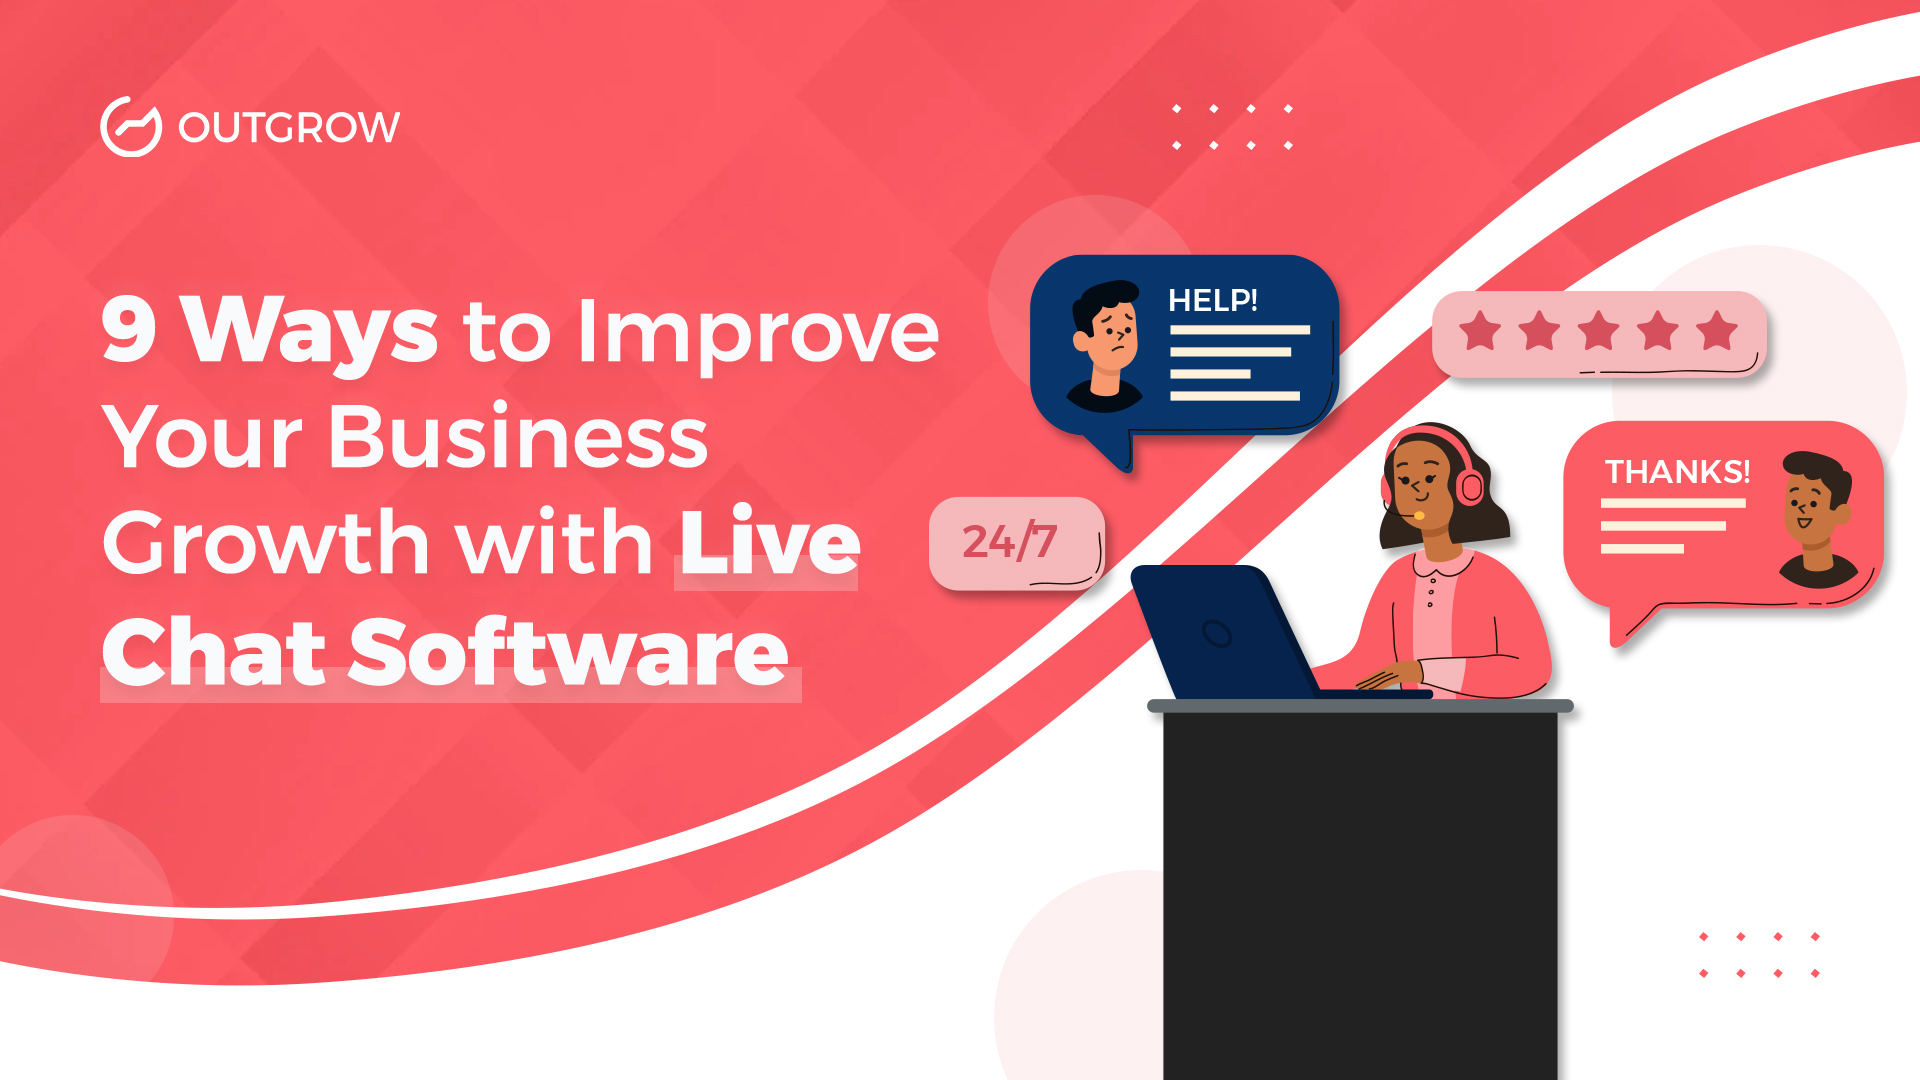 9 Ways to Improve Your Business Growth with Live Chat